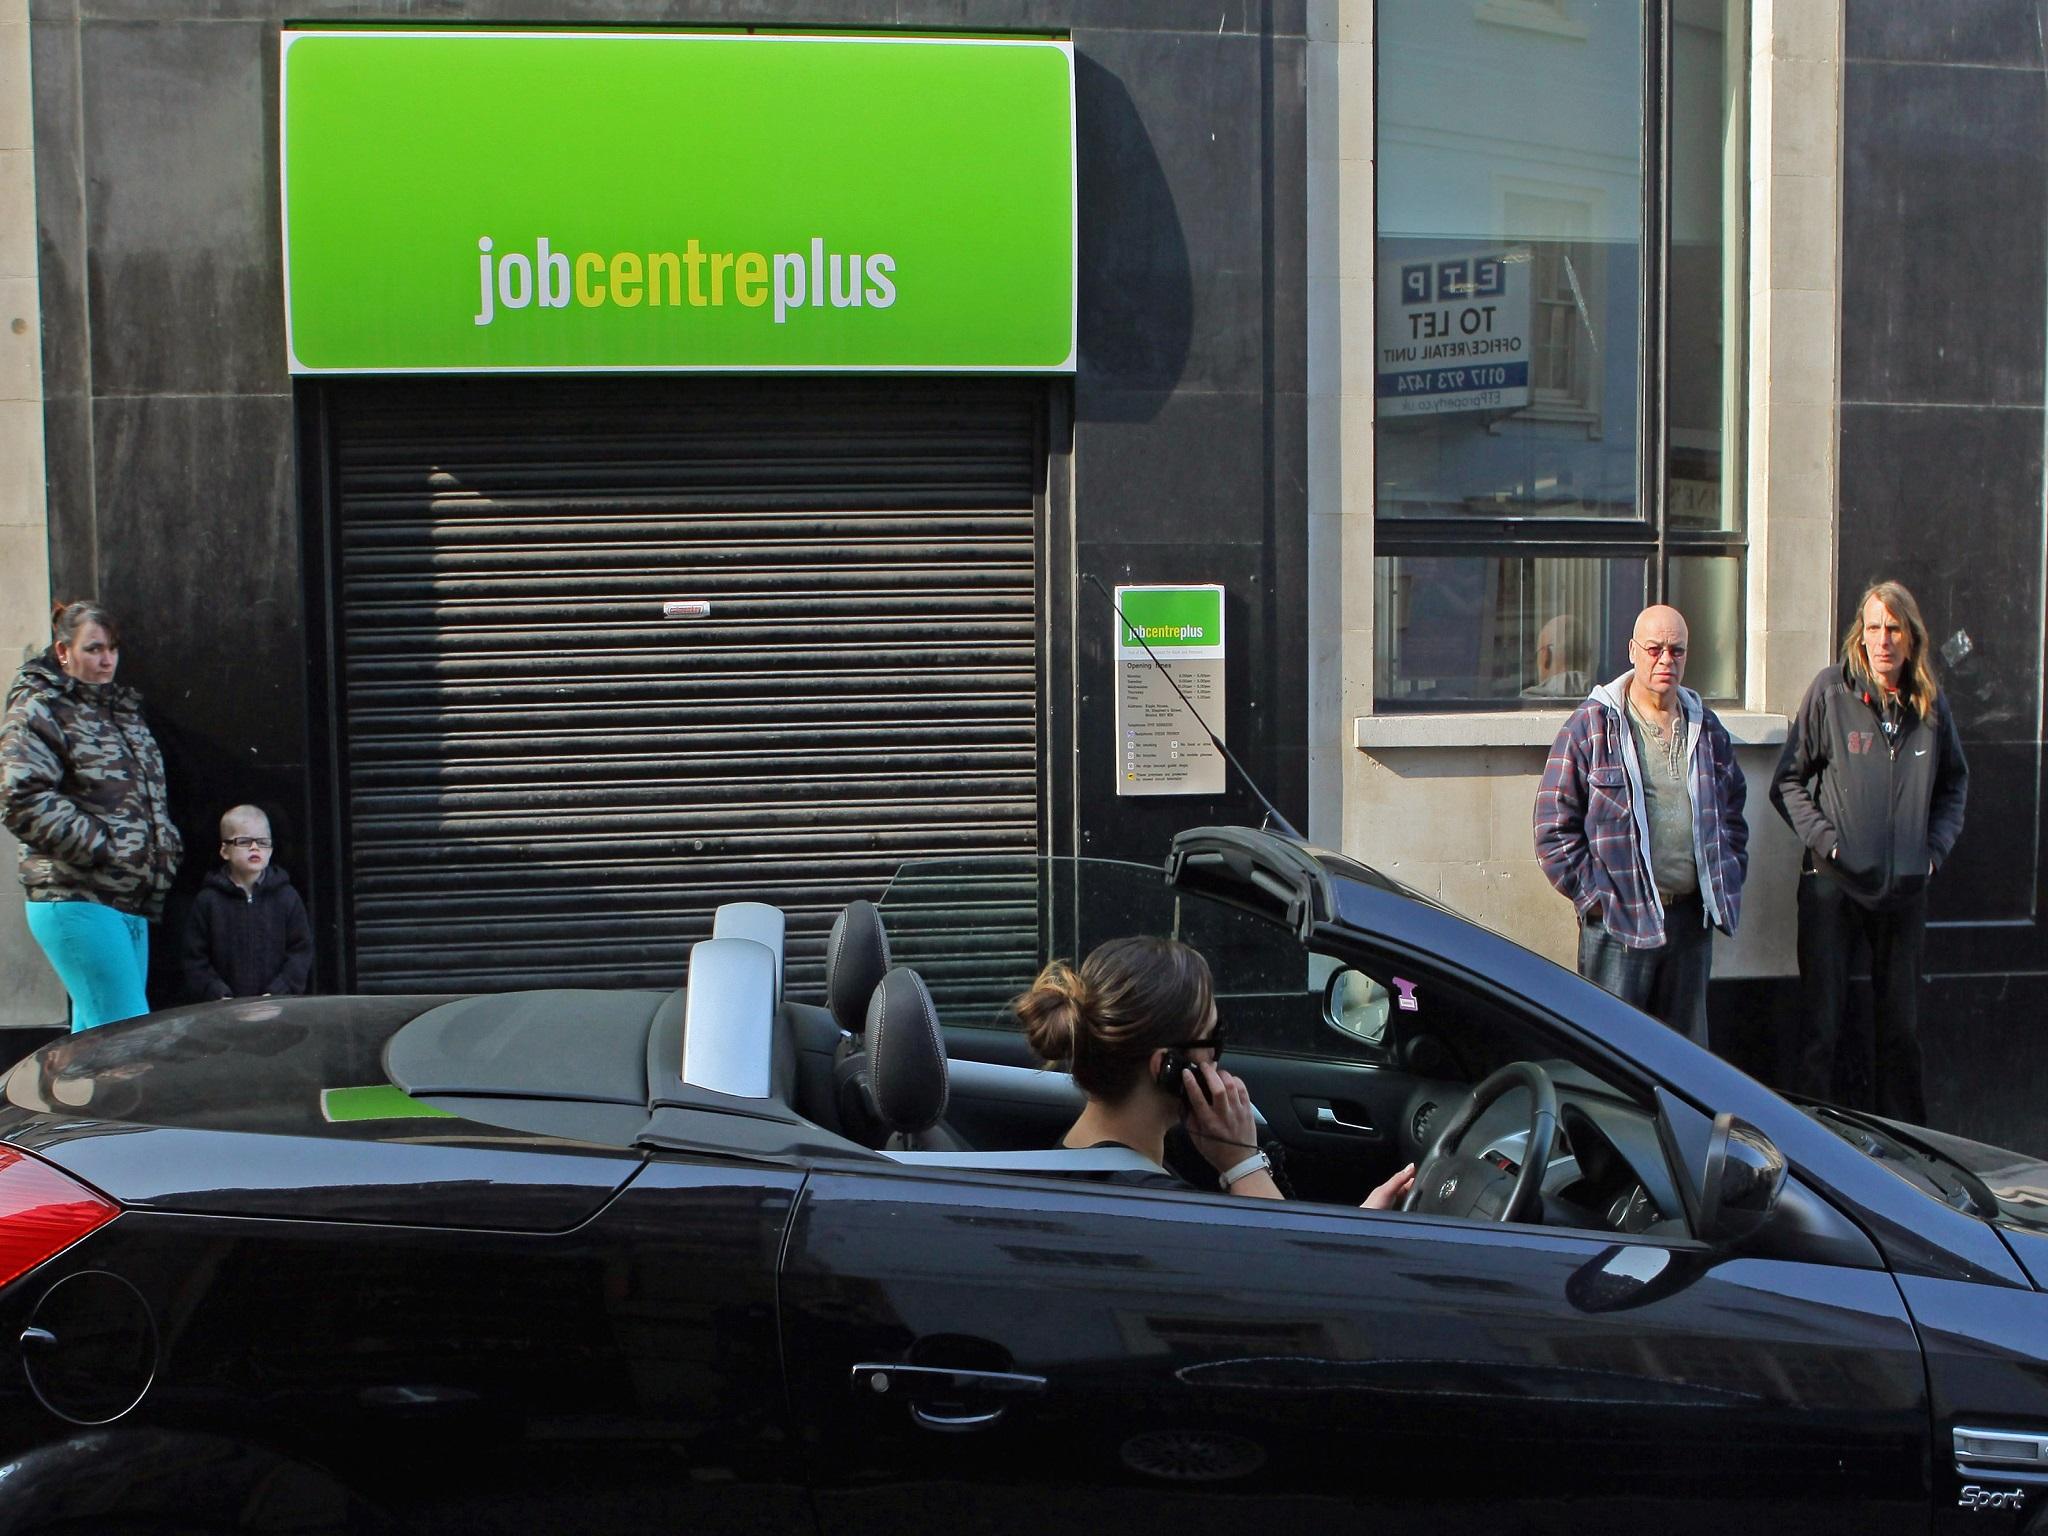 Unemployment is a blight, but latest figures show it at its lowest level since 1975